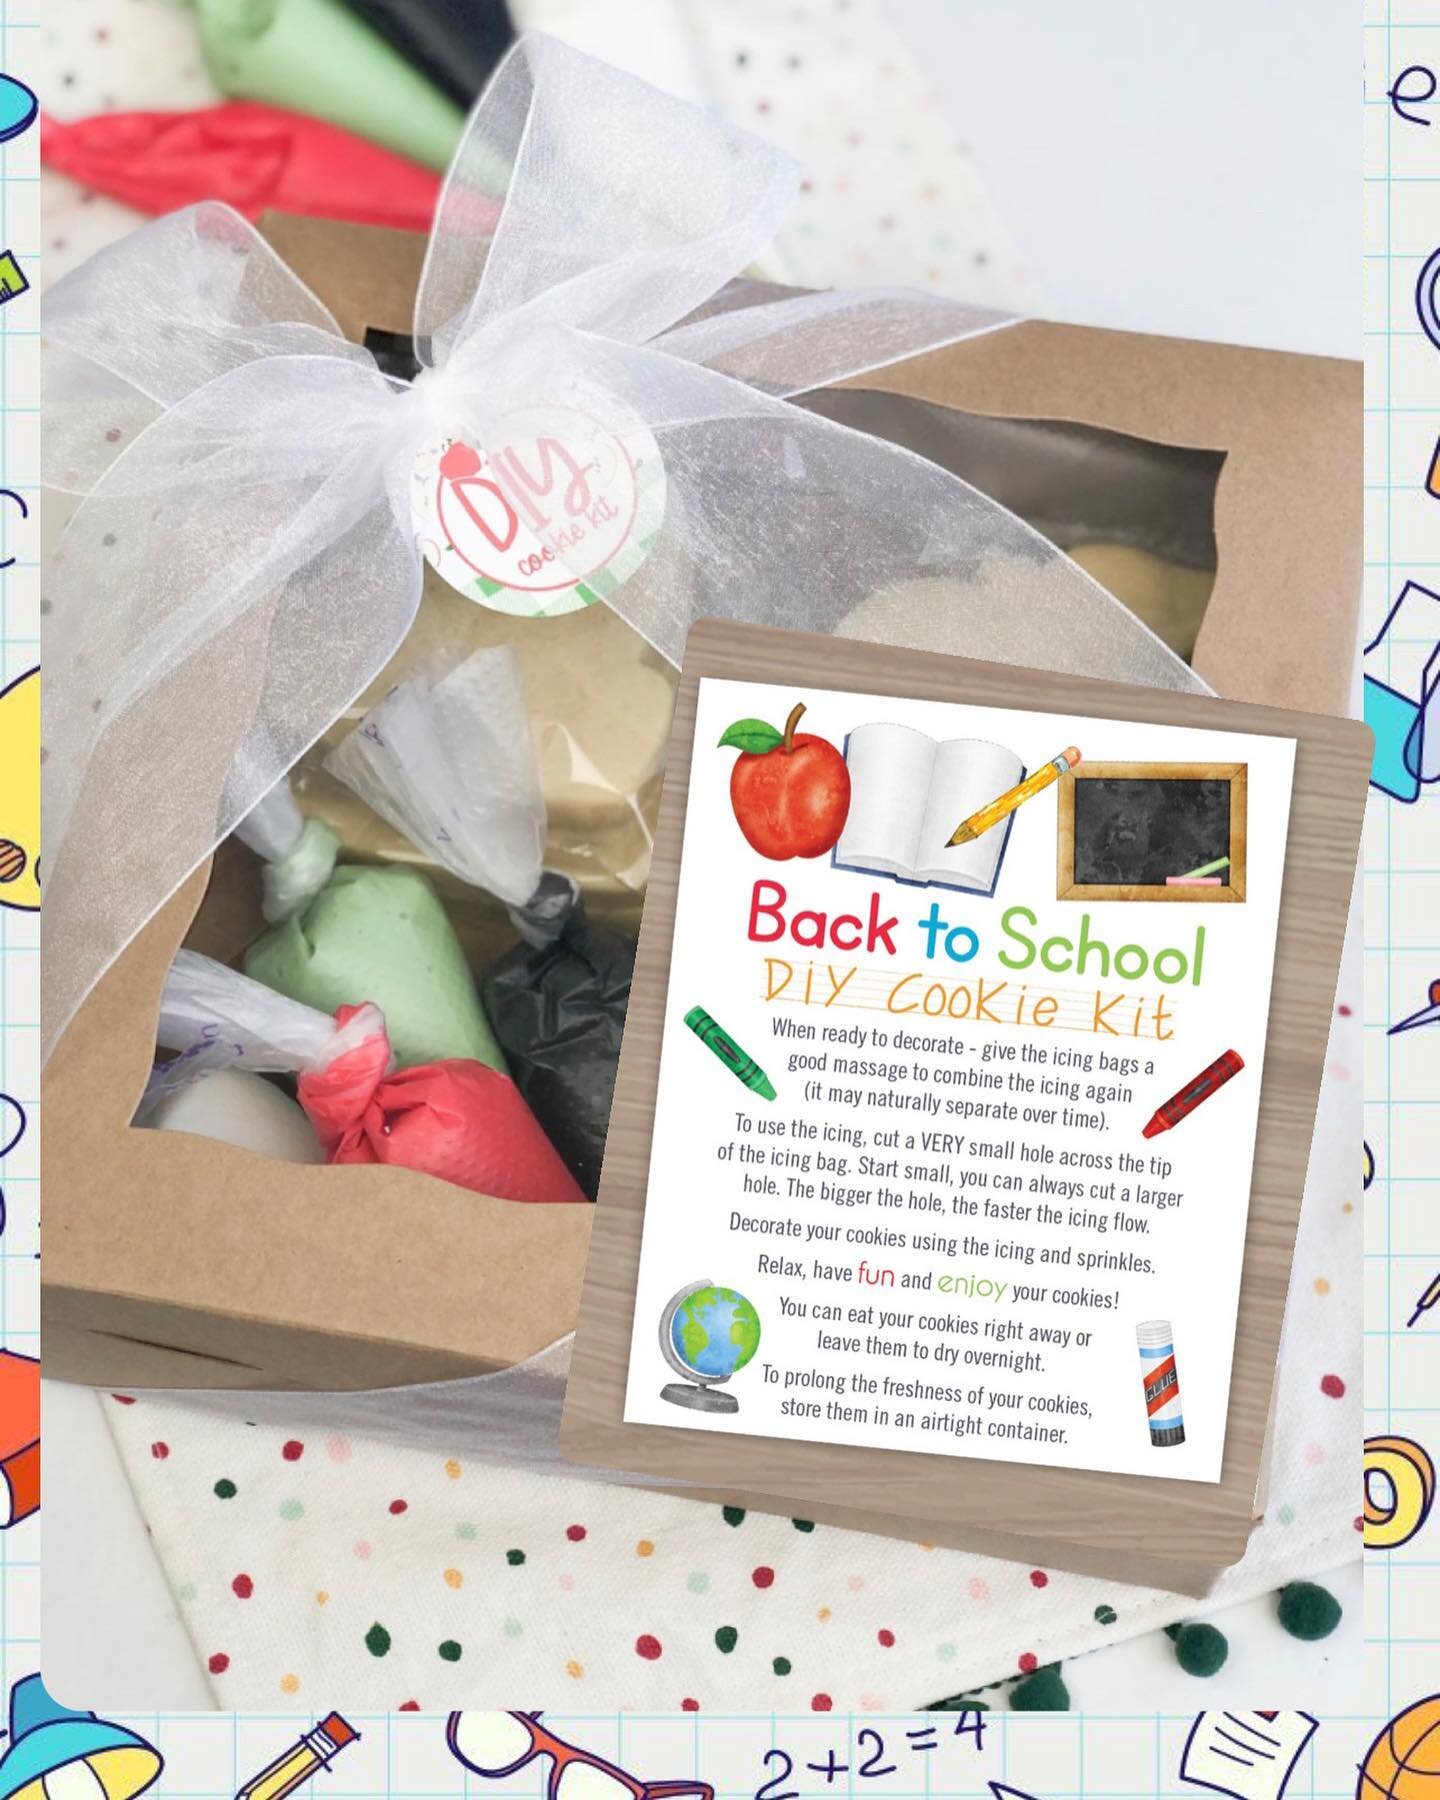 🍎📓✏️ PRESALE✏️📓🍎

BACK 2 SCHOOL DIY COOKIE KITS

🍎Dozen school themed sugar cookies 
✏️3 festive colors of my famous buttercream 
📓Sprinkles galore
🍎B2S Sticker Activity
✏️Fun and memorable way to celebrate a new school year! 

Kit pick up Sep